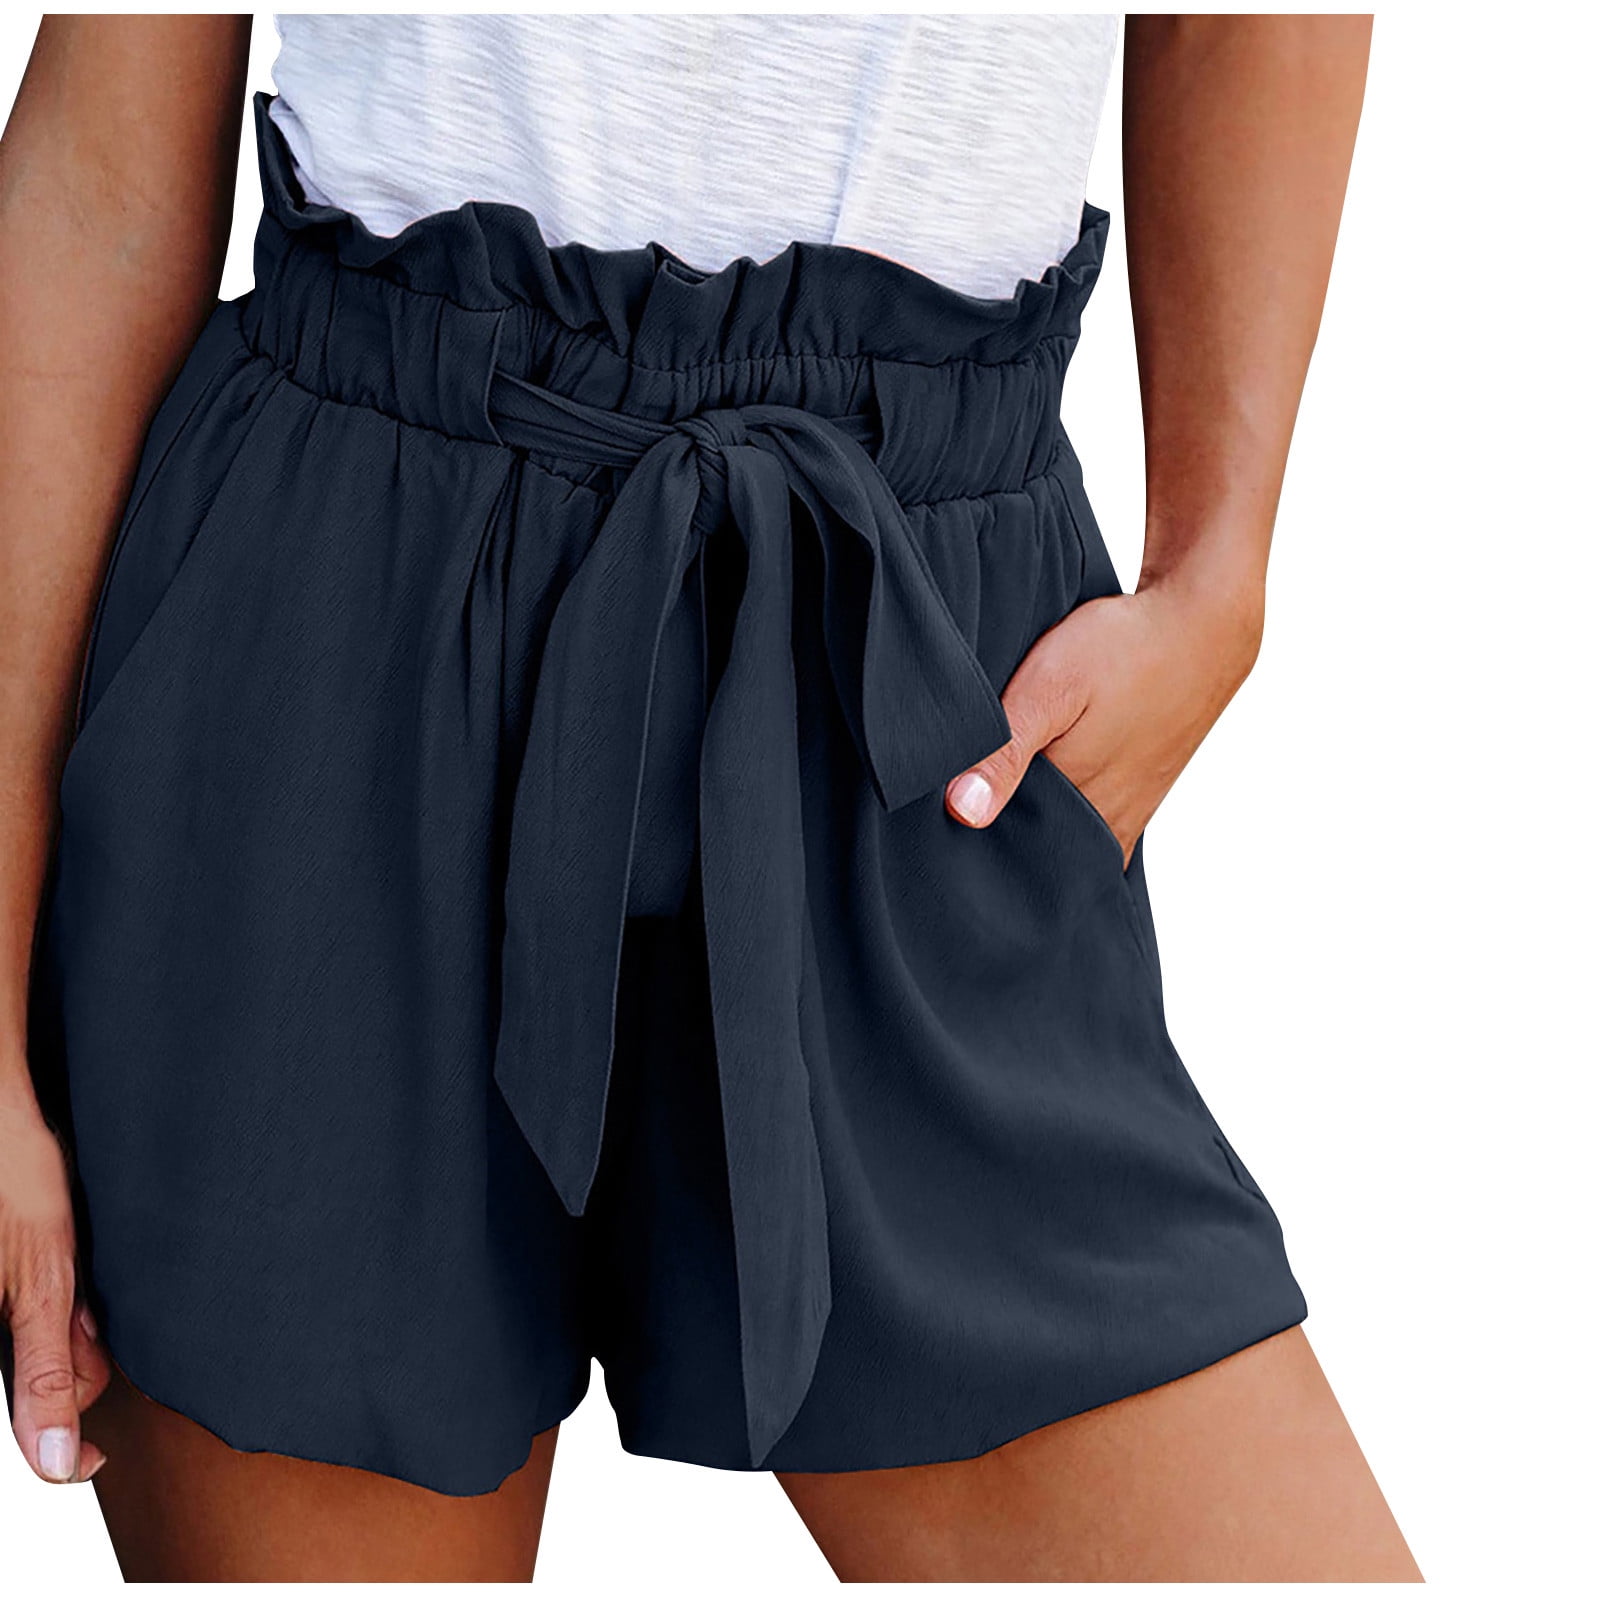 ylioge High Waist Vacation Shorts for Women Lace Up Ruffle Trendy Summer  Short Pants Pockets Solid Color Loose Fit Shorts Pantalones 